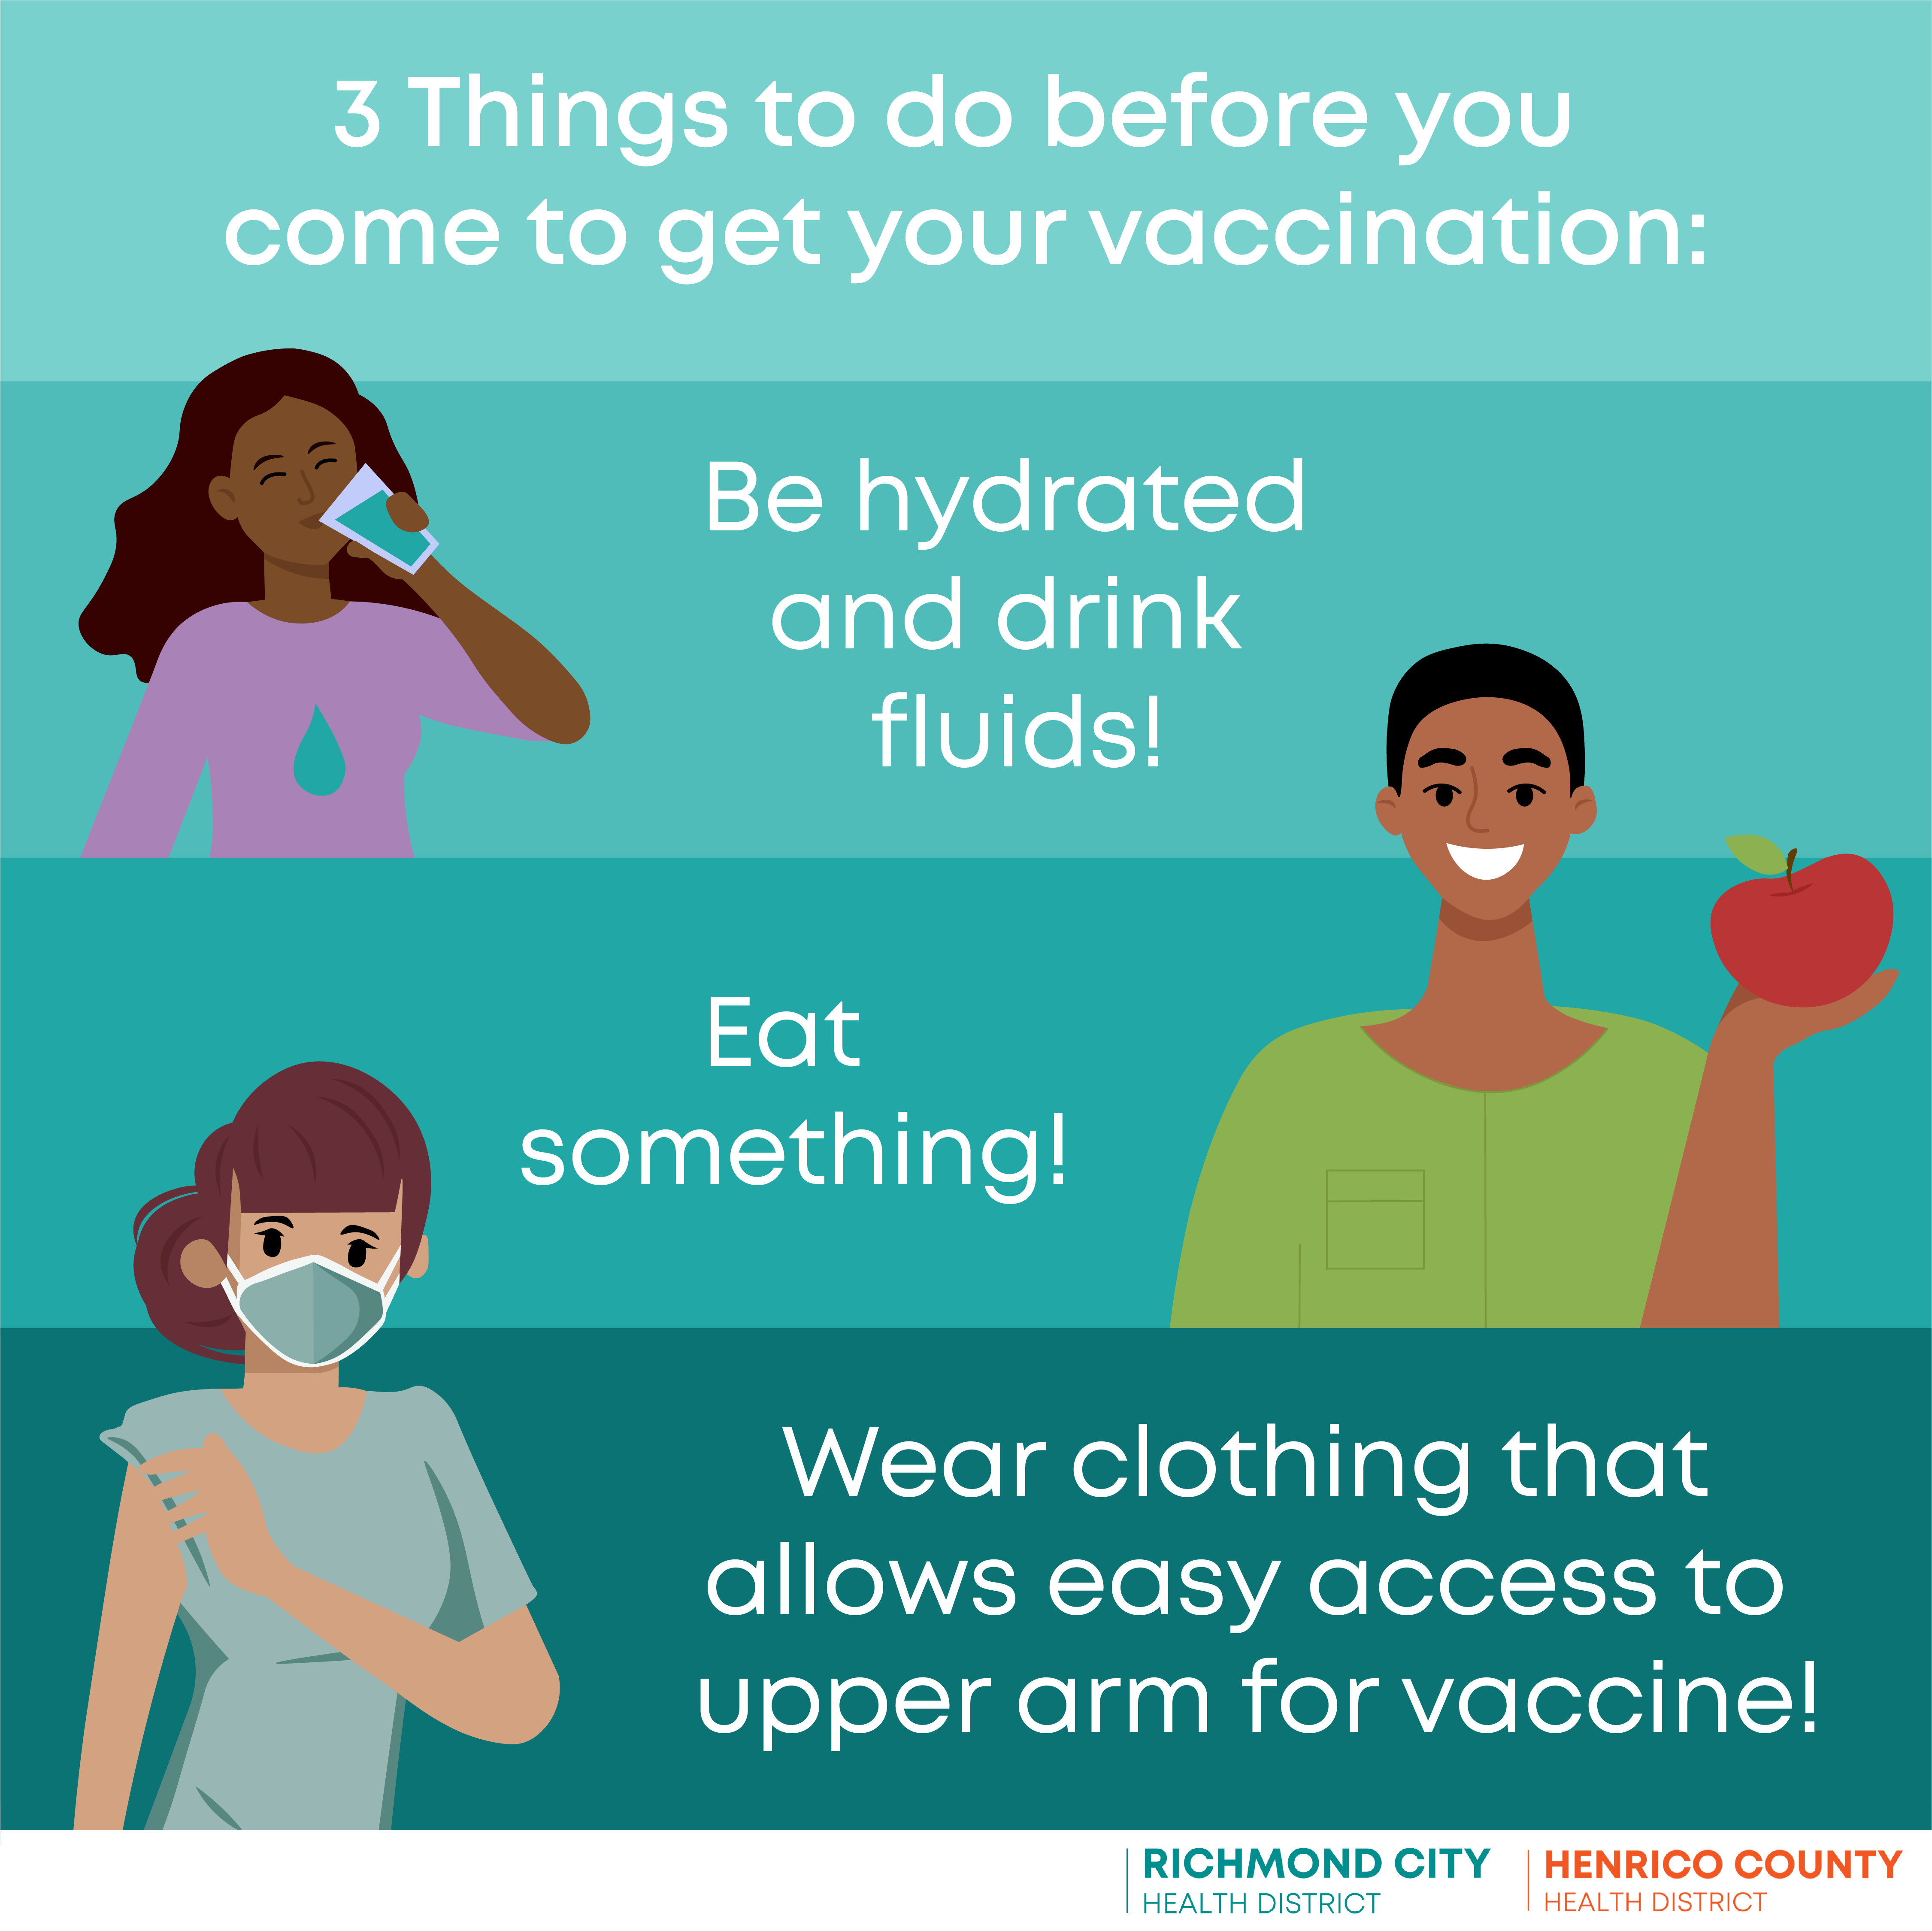 Three things to do before getting the COVID-19 vaccine: Be hydrated; eat something; wear clothing that allows access to upper arm.